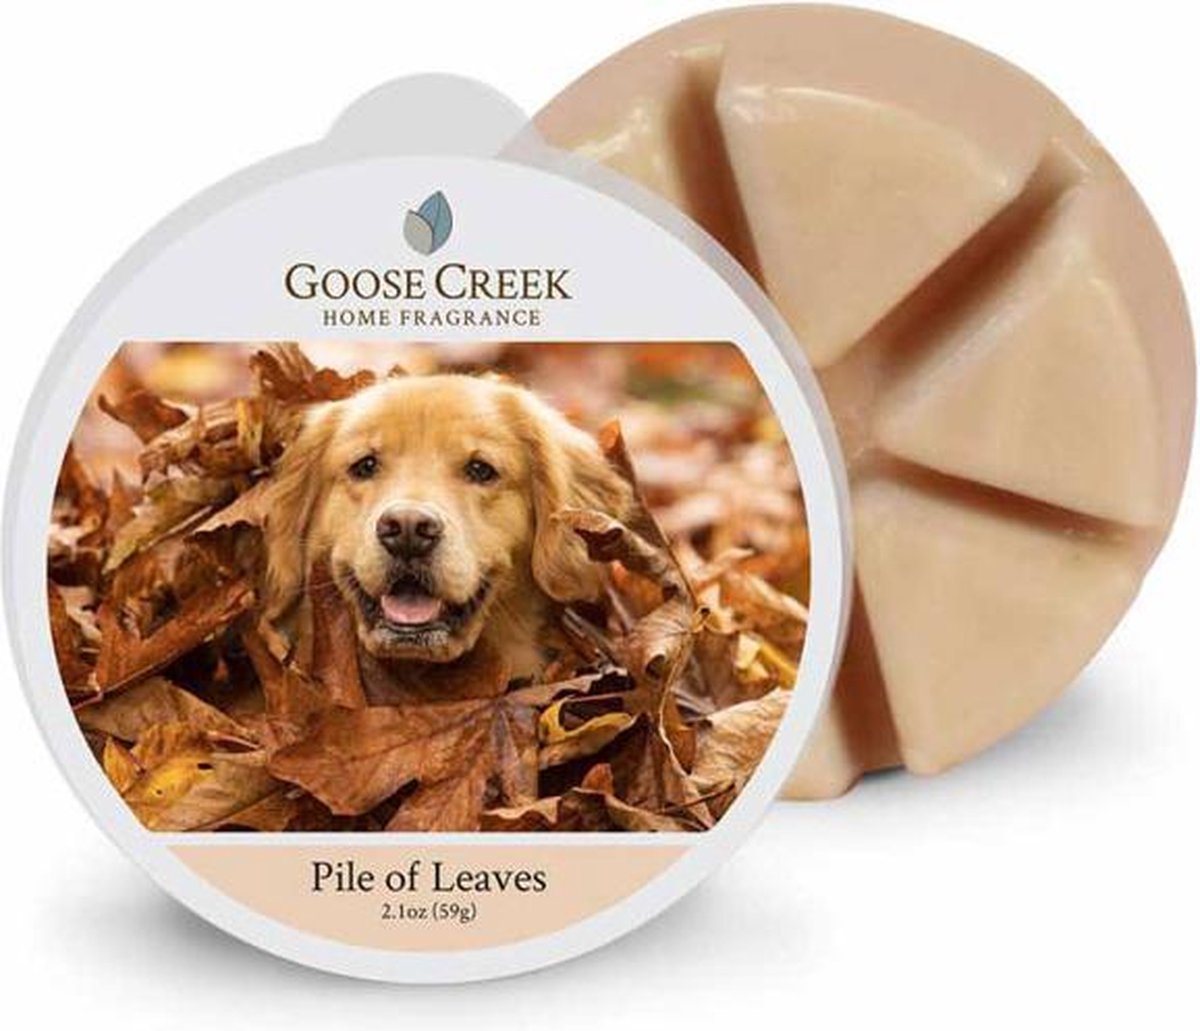 Goose creek pile of leaves wax melts